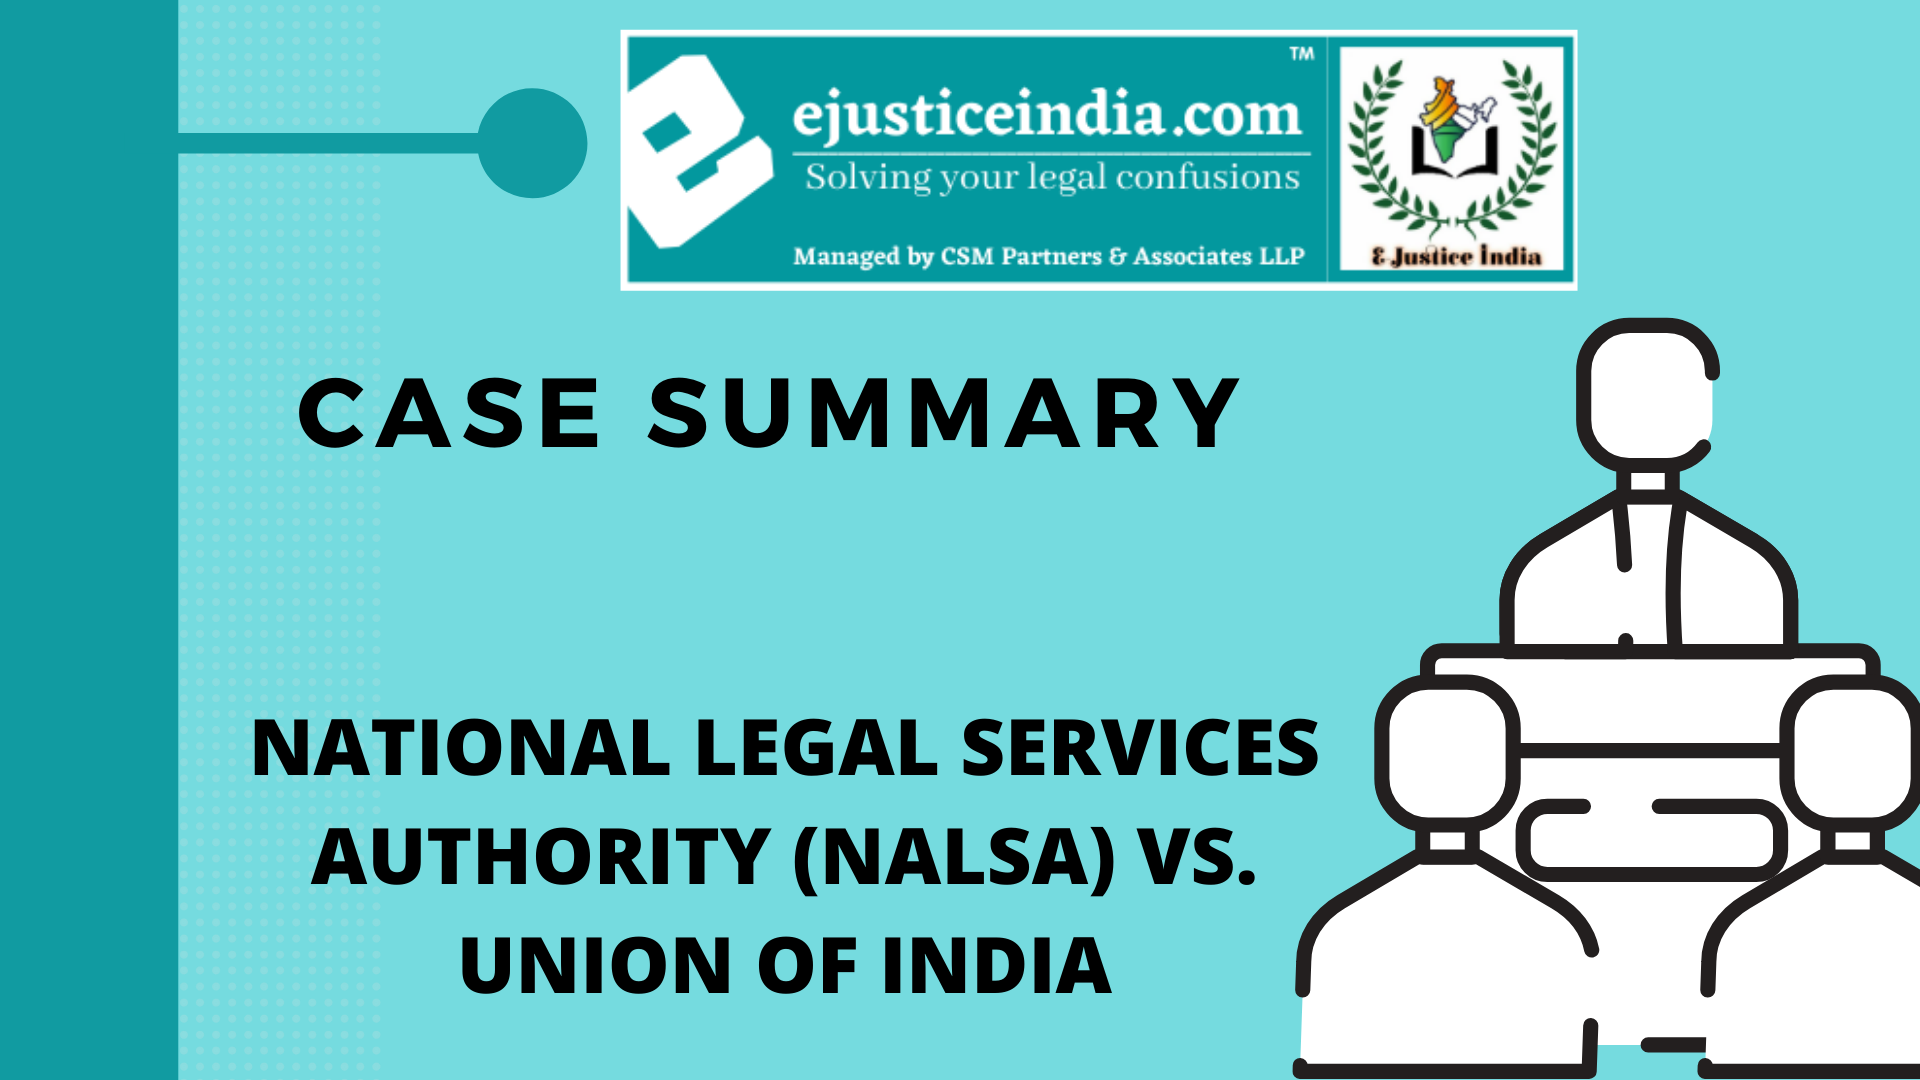 NATIONAL LEGAL SERVICES AUTHORITY (NALSA) VS. UNION OF INDIA